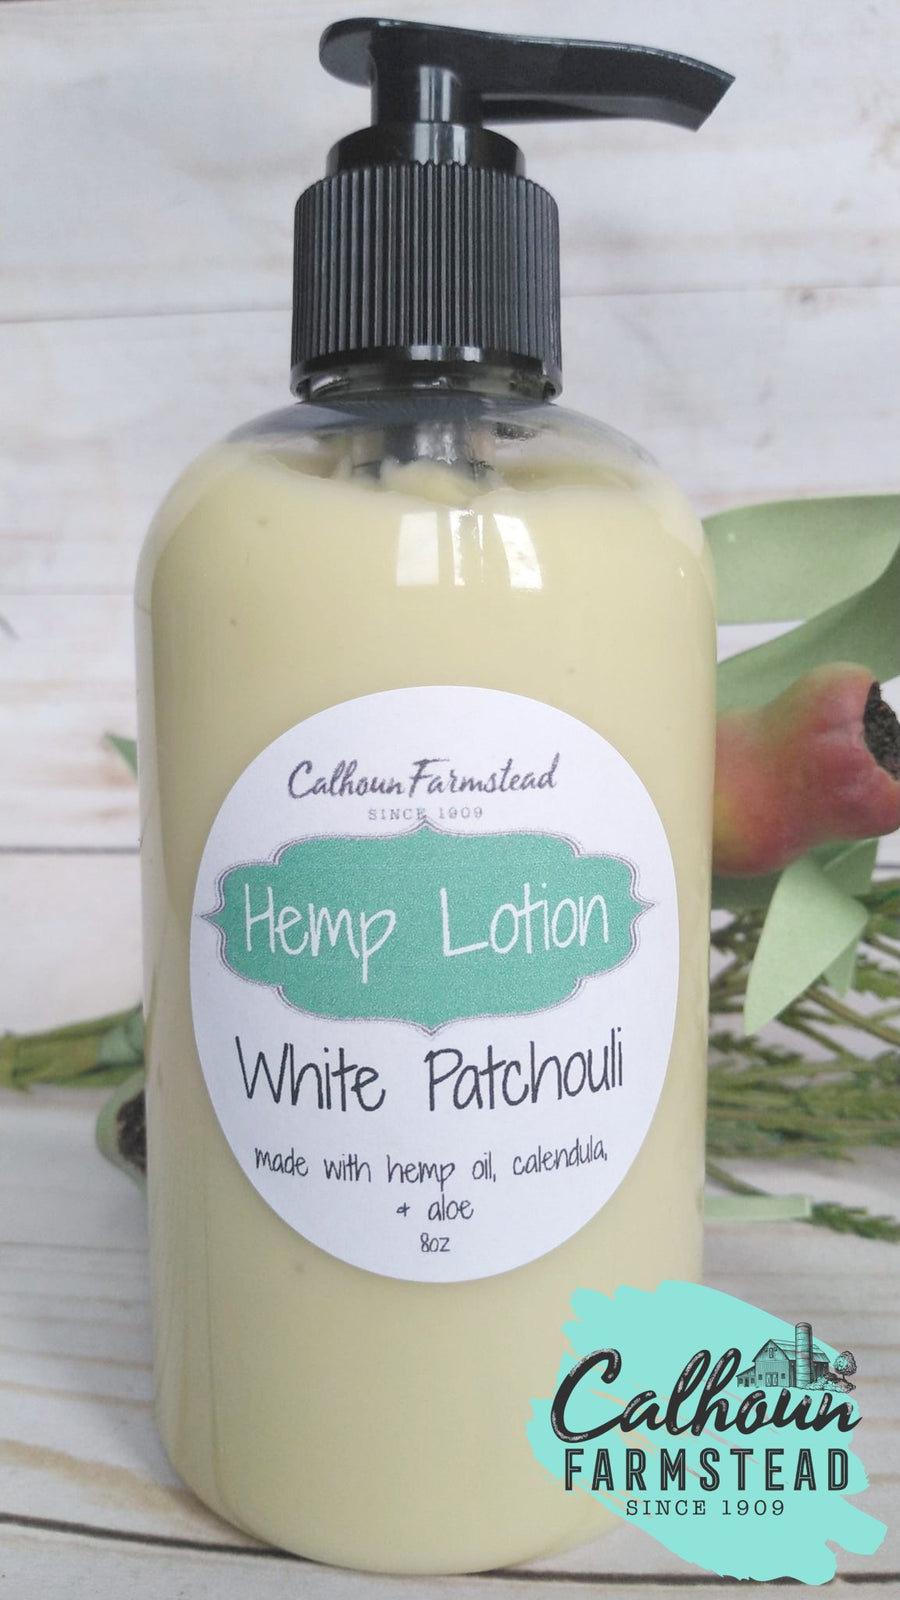 hemp lotion white patchouli. made with hemp seed butter for eczema, psoriasis, and sensitive skin types.